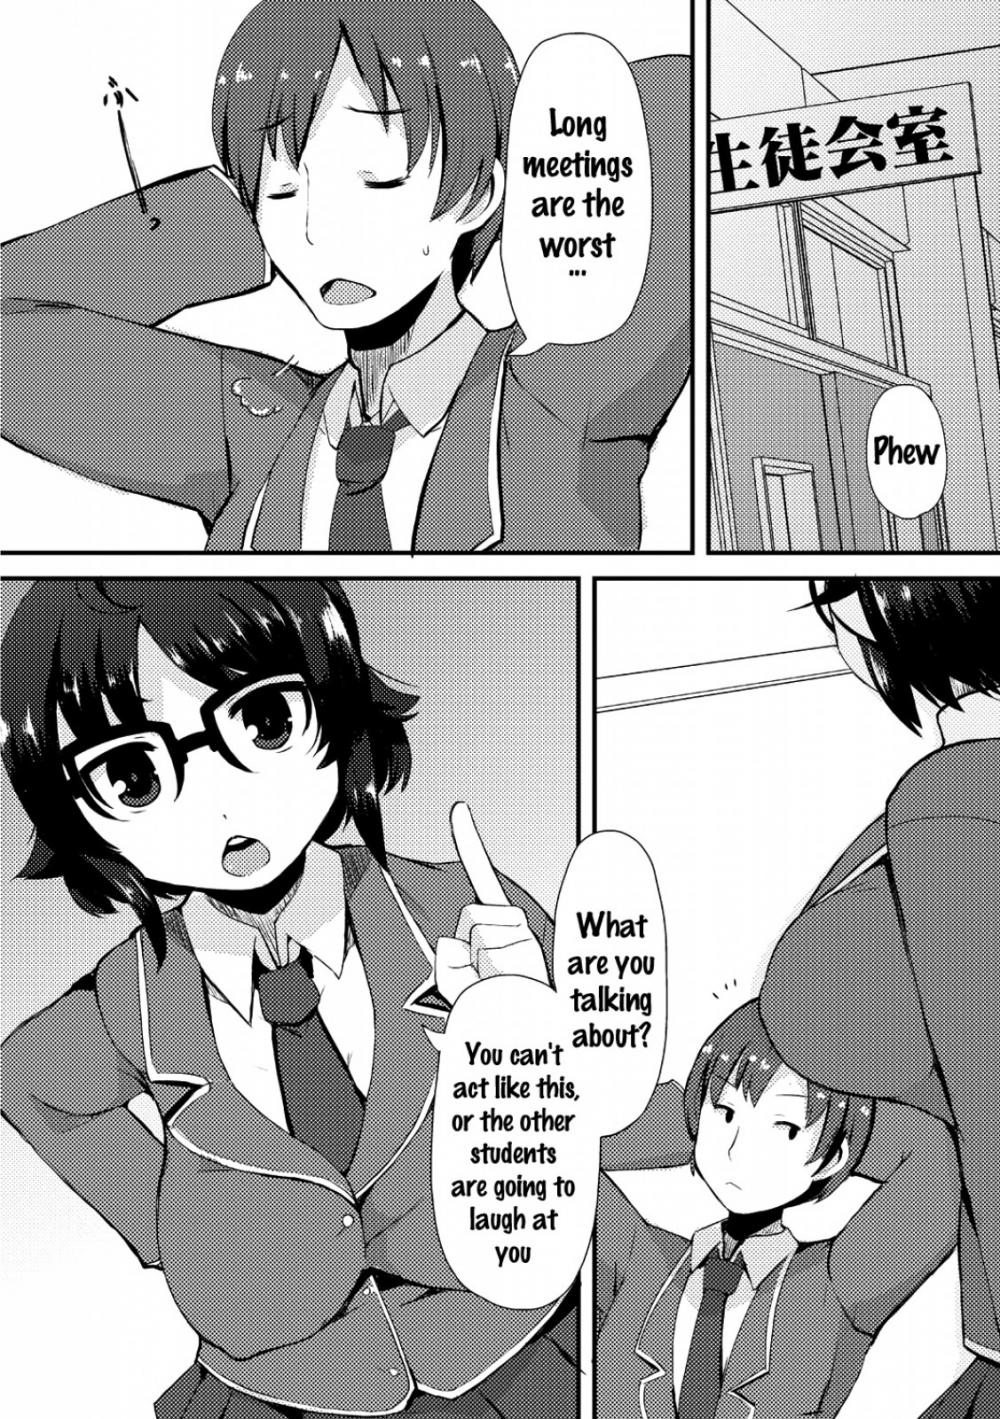 Hentai Manga Comic-A Large Breasted Honor Student Makes The Big Change to Perverted Masochist-Chapter 8-3